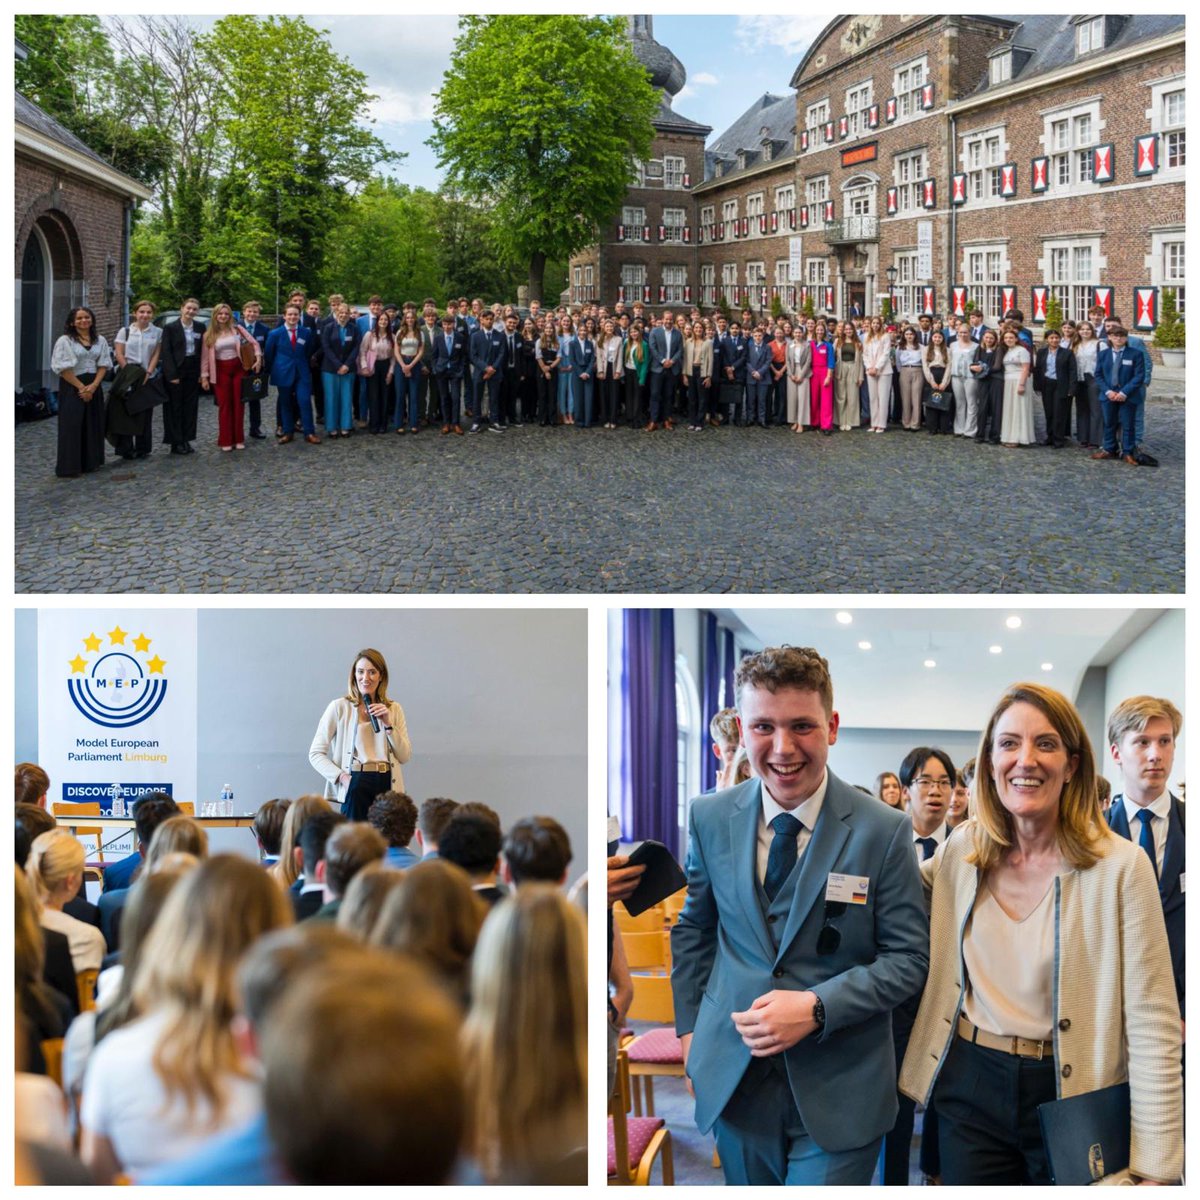 Ending the day in the Netherlands! 🇪🇺🇳🇱 With more students, more young people, more enthusiasm for Europe. Really enjoyed participating during one of the Model European Parliament sessions in Limburg. This is Europe’s next generation. #UseYourVote